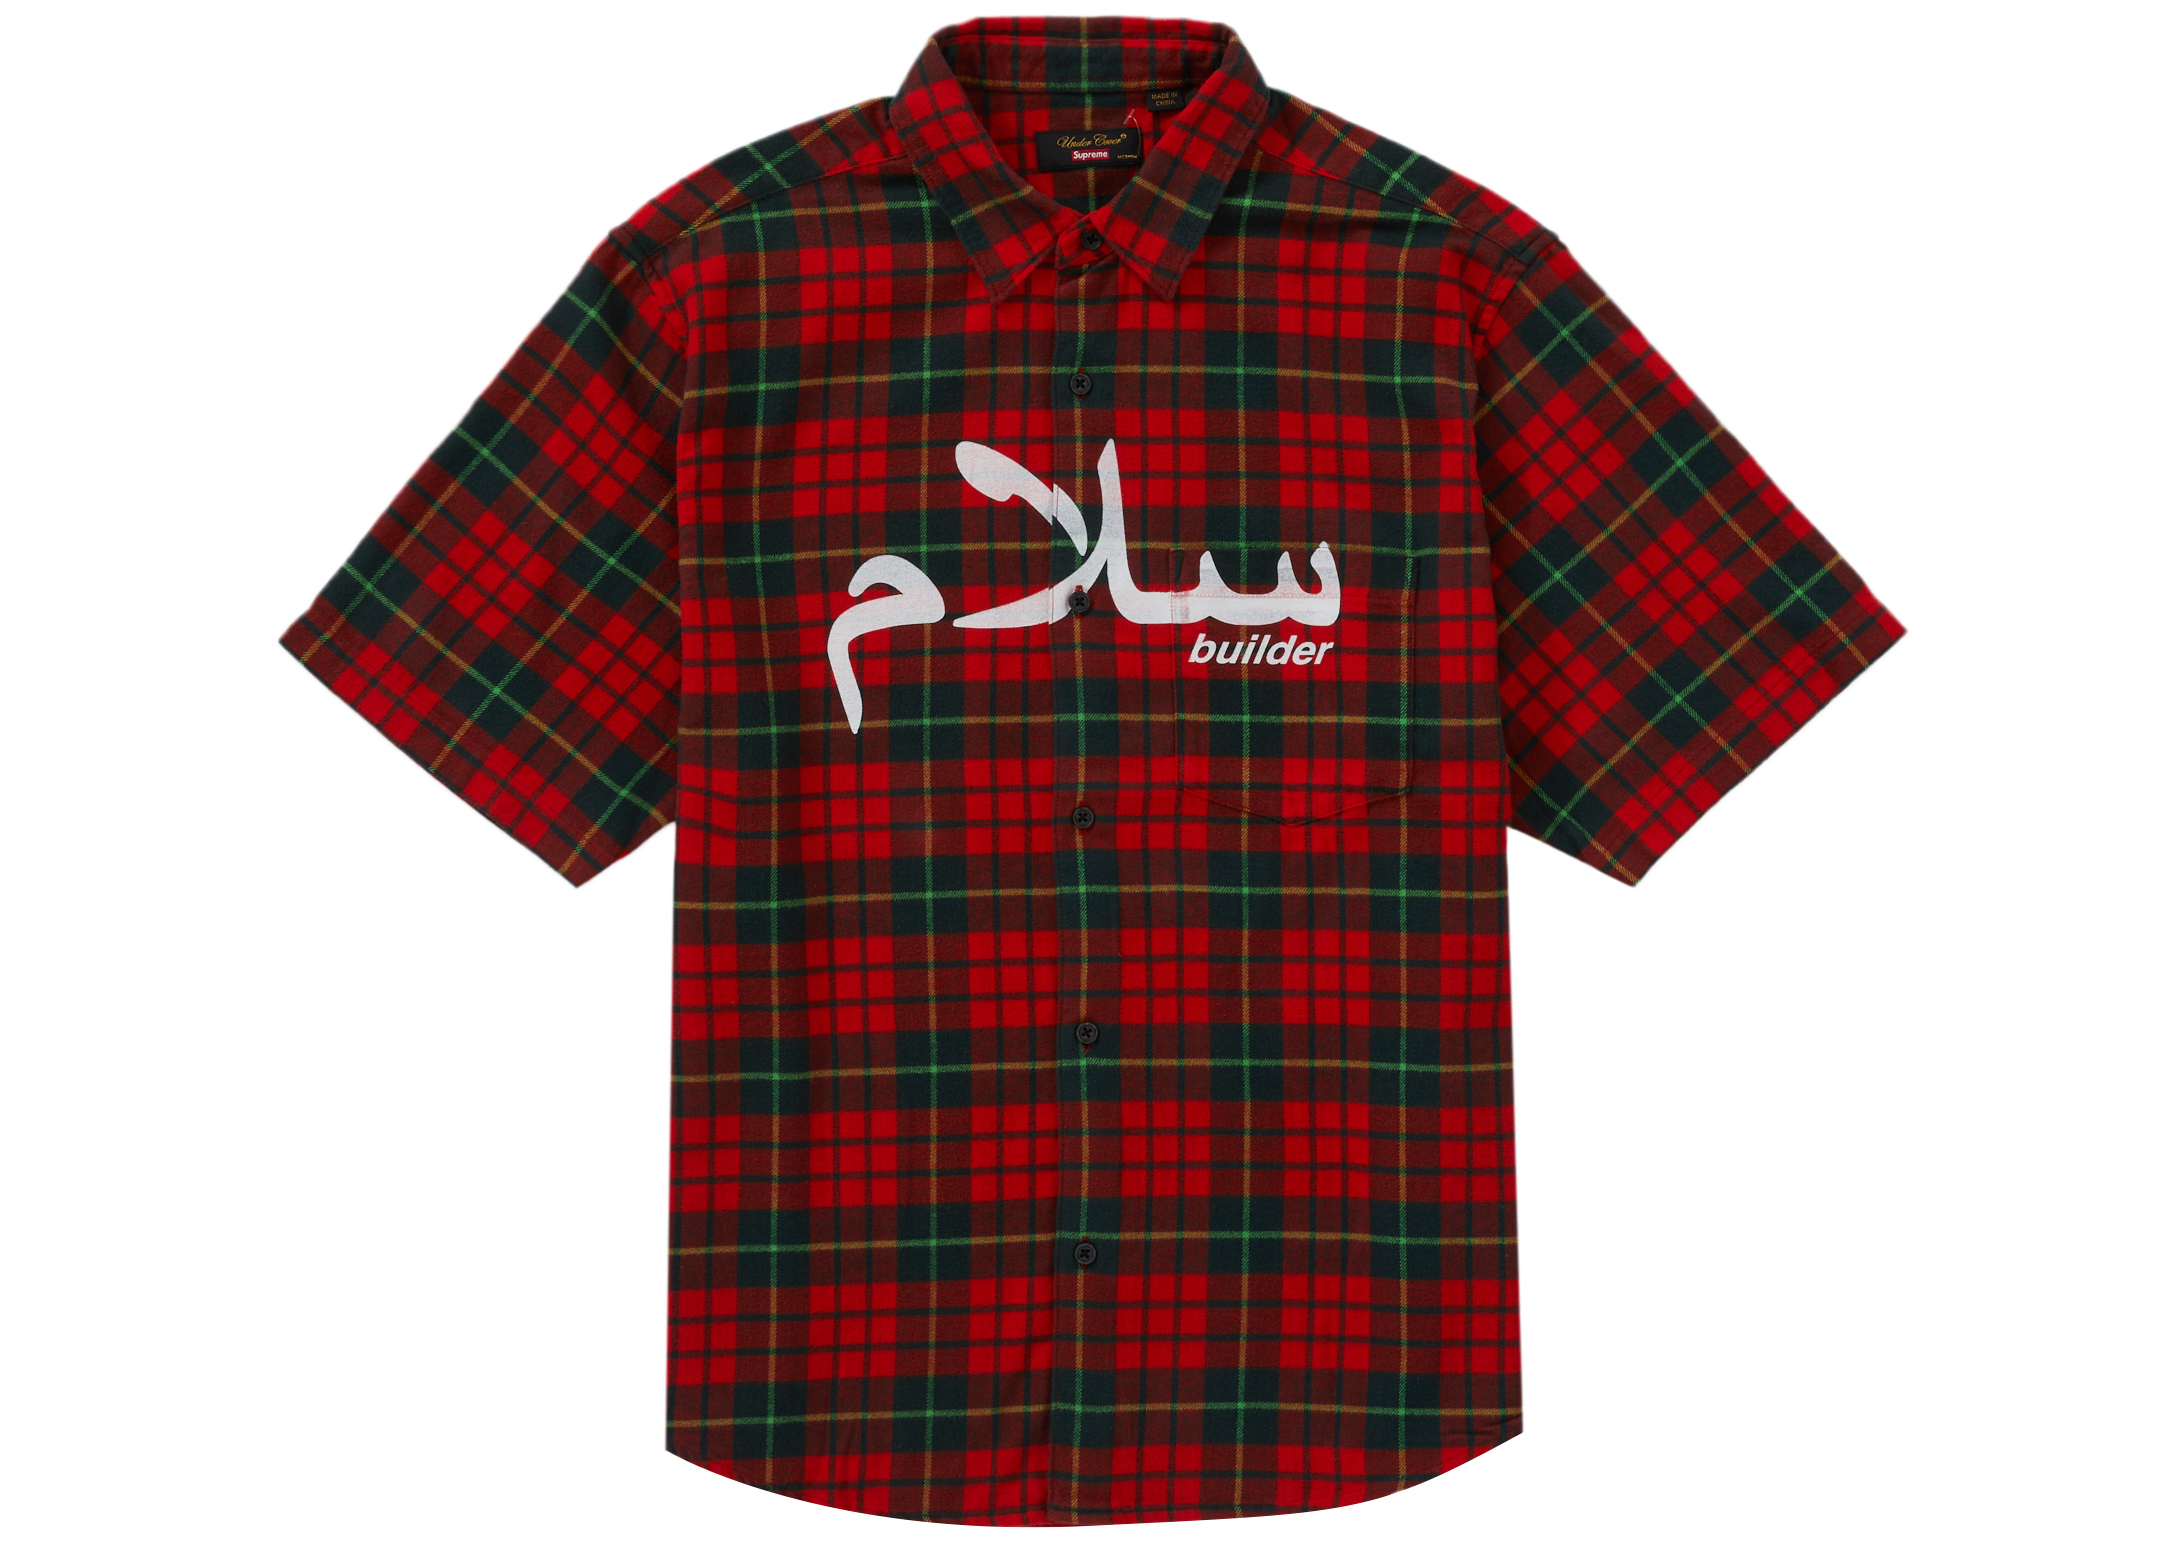 Supreme Undercover S/S Flannel Shirt即日発送します^-^